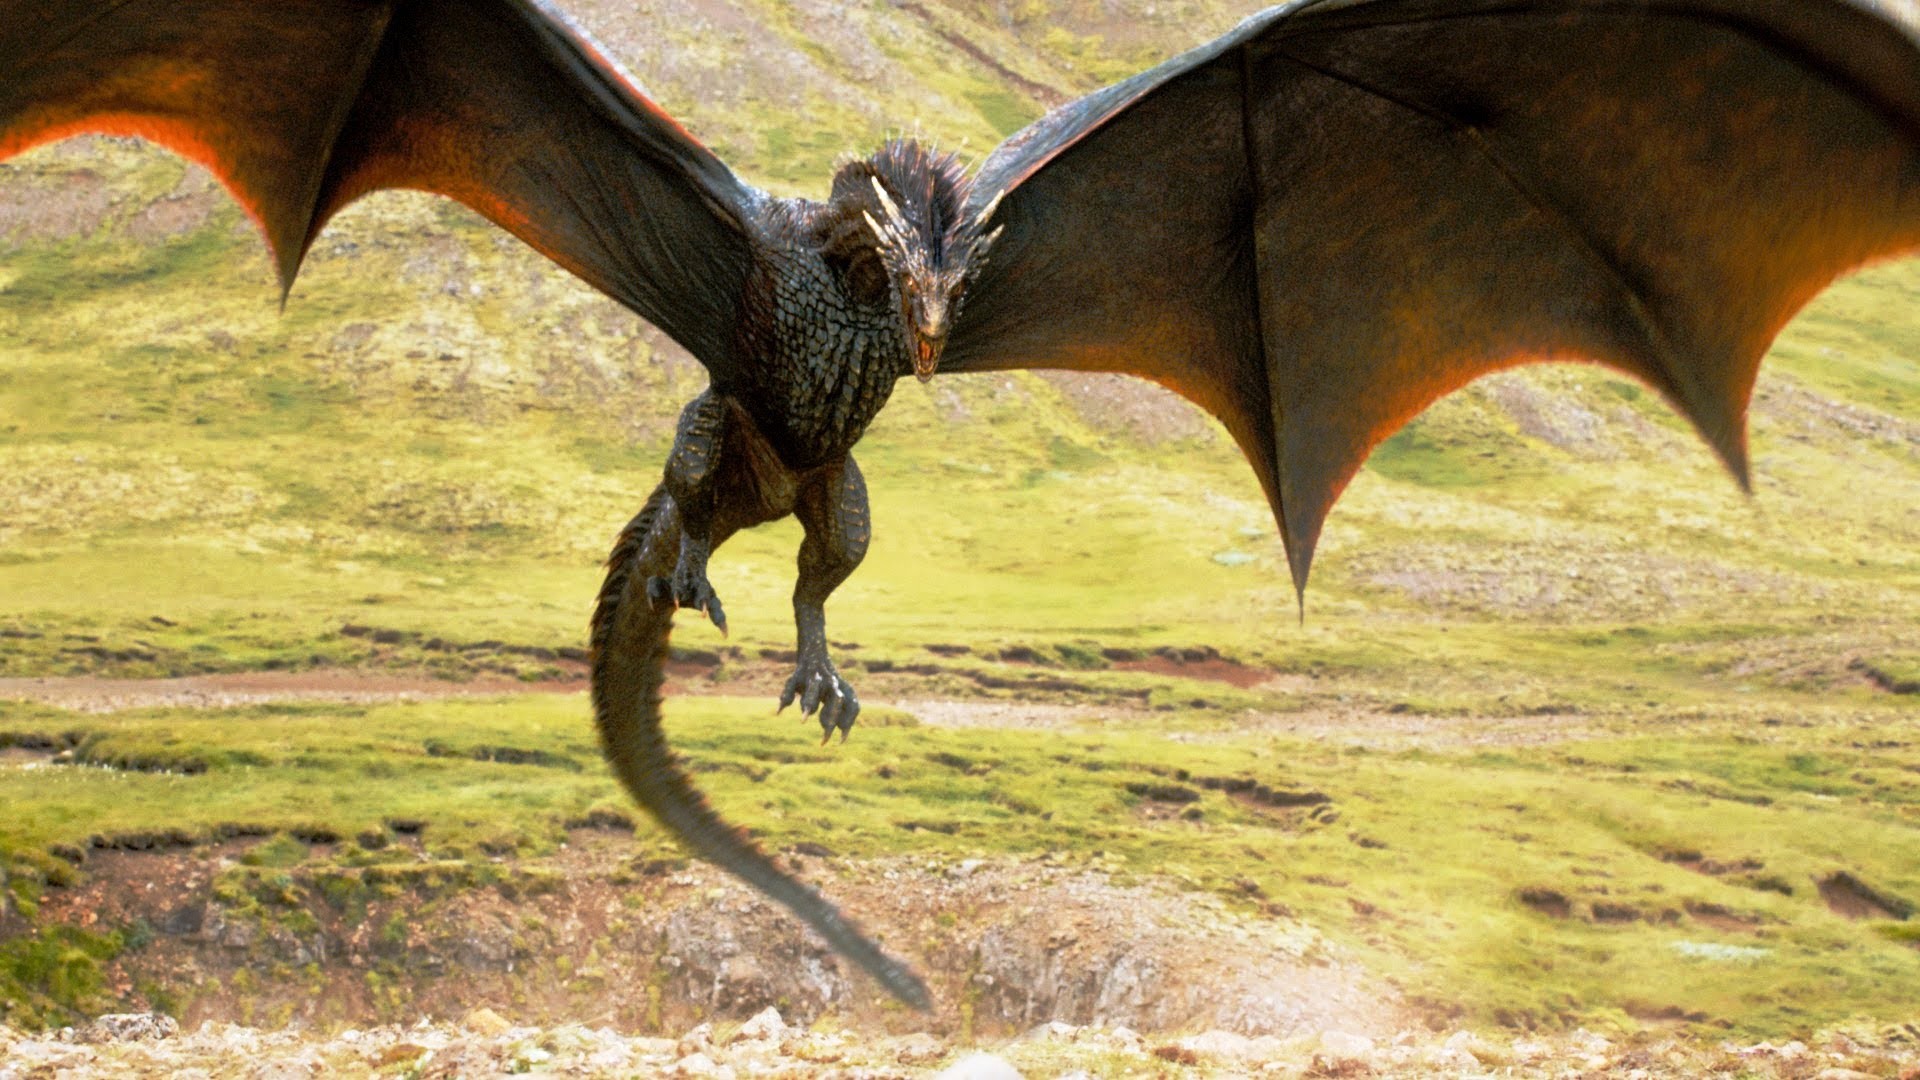 Wallpapers Game of Thrones Dragons with high-resolution 1920x1080 pixel. You can use this poster wallpaper for your Desktop Computers, Mac Screensavers, Windows Backgrounds, iPhone Wallpapers, Tablet or Android Lock screen and another Mobile device